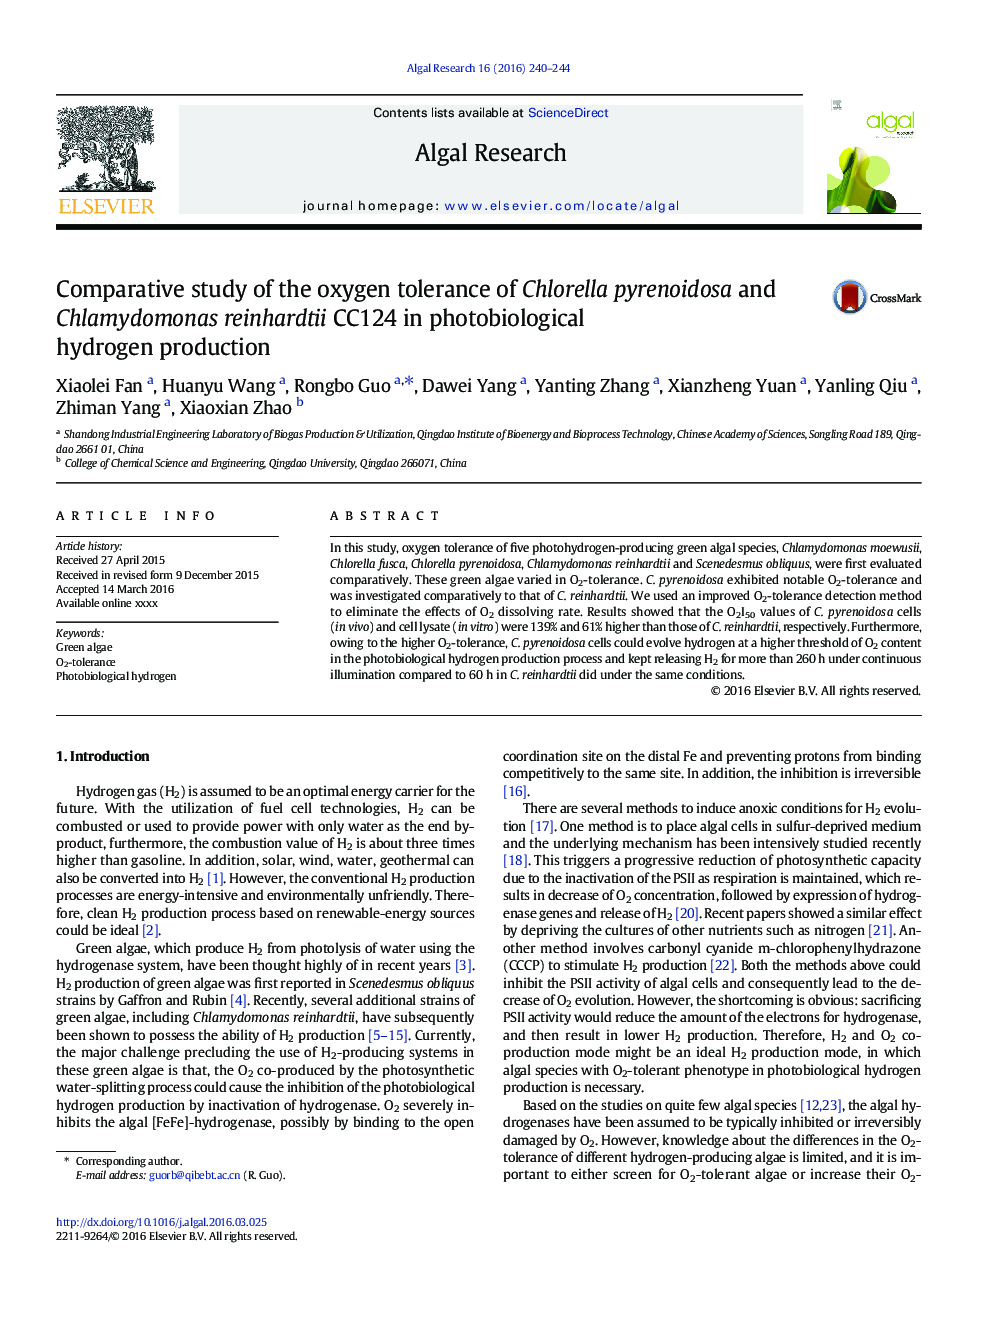 Comparative study of the oxygen tolerance of Chlorella pyrenoidosa and Chlamydomonas reinhardtii CC124 in photobiological hydrogen production